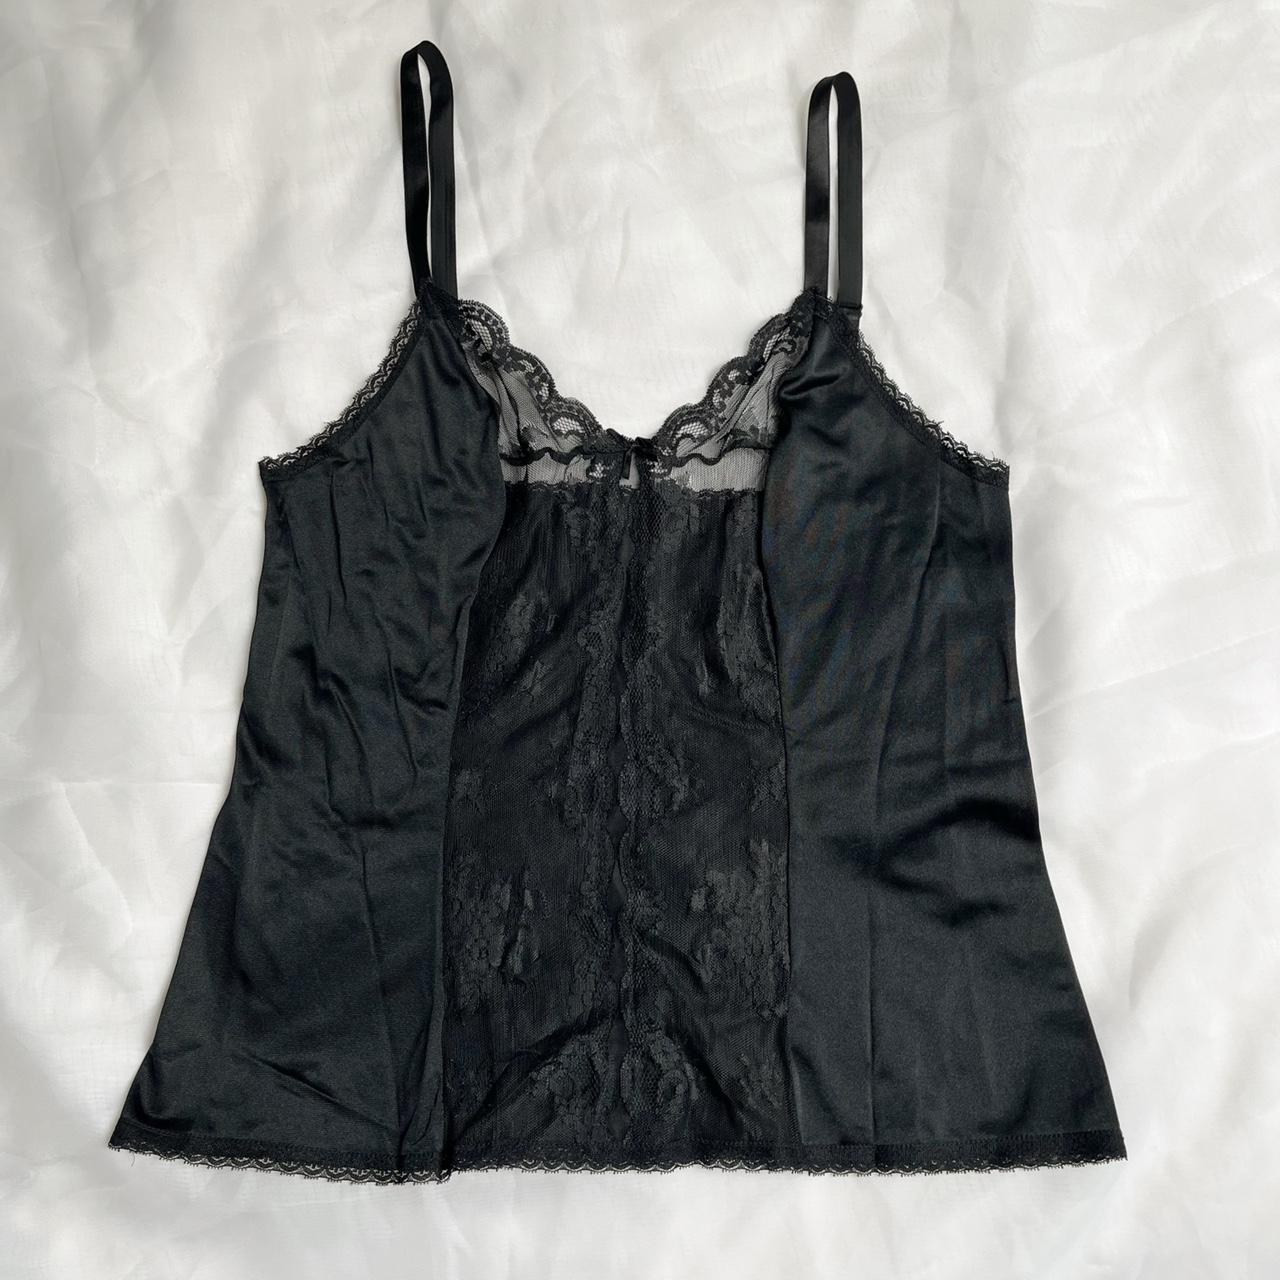 Product Image 1 - Black sheer lace vintage cami